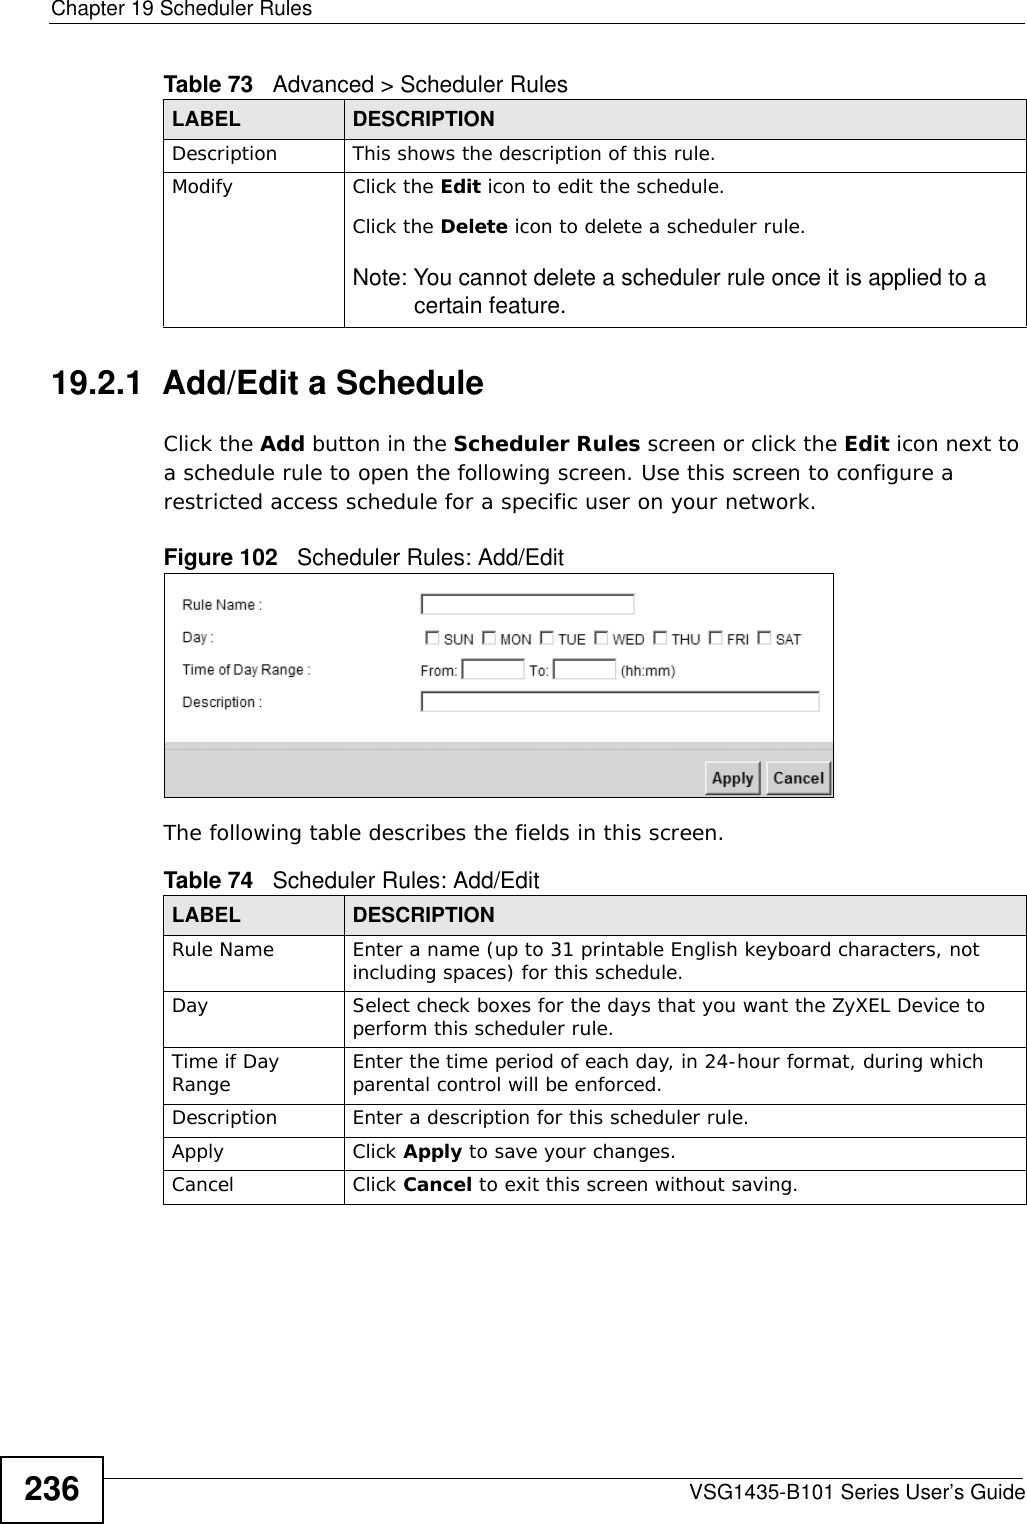 Chapter 19 Scheduler RulesVSG1435-B101 Series User’s Guide23619.2.1  Add/Edit a ScheduleClick the Add button in the Scheduler Rules screen or click the Edit icon next to a schedule rule to open the following screen. Use this screen to configure a restricted access schedule for a specific user on your network. Figure 102   Scheduler Rules: Add/Edit The following table describes the fields in this screen. Description This shows the description of this rule.Modify Click the Edit icon to edit the schedule.Click the Delete icon to delete a scheduler rule.Note: You cannot delete a scheduler rule once it is applied to a certain feature.Table 73   Advanced &gt; Scheduler RulesLABEL DESCRIPTIONTable 74   Scheduler Rules: Add/Edit LABEL DESCRIPTIONRule Name Enter a name (up to 31 printable English keyboard characters, not including spaces) for this schedule. Day Select check boxes for the days that you want the ZyXEL Device to perform this scheduler rule. Time if Day Range Enter the time period of each day, in 24-hour format, during which parental control will be enforced. Description Enter a description for this scheduler rule.Apply Click Apply to save your changes.Cancel Click Cancel to exit this screen without saving.